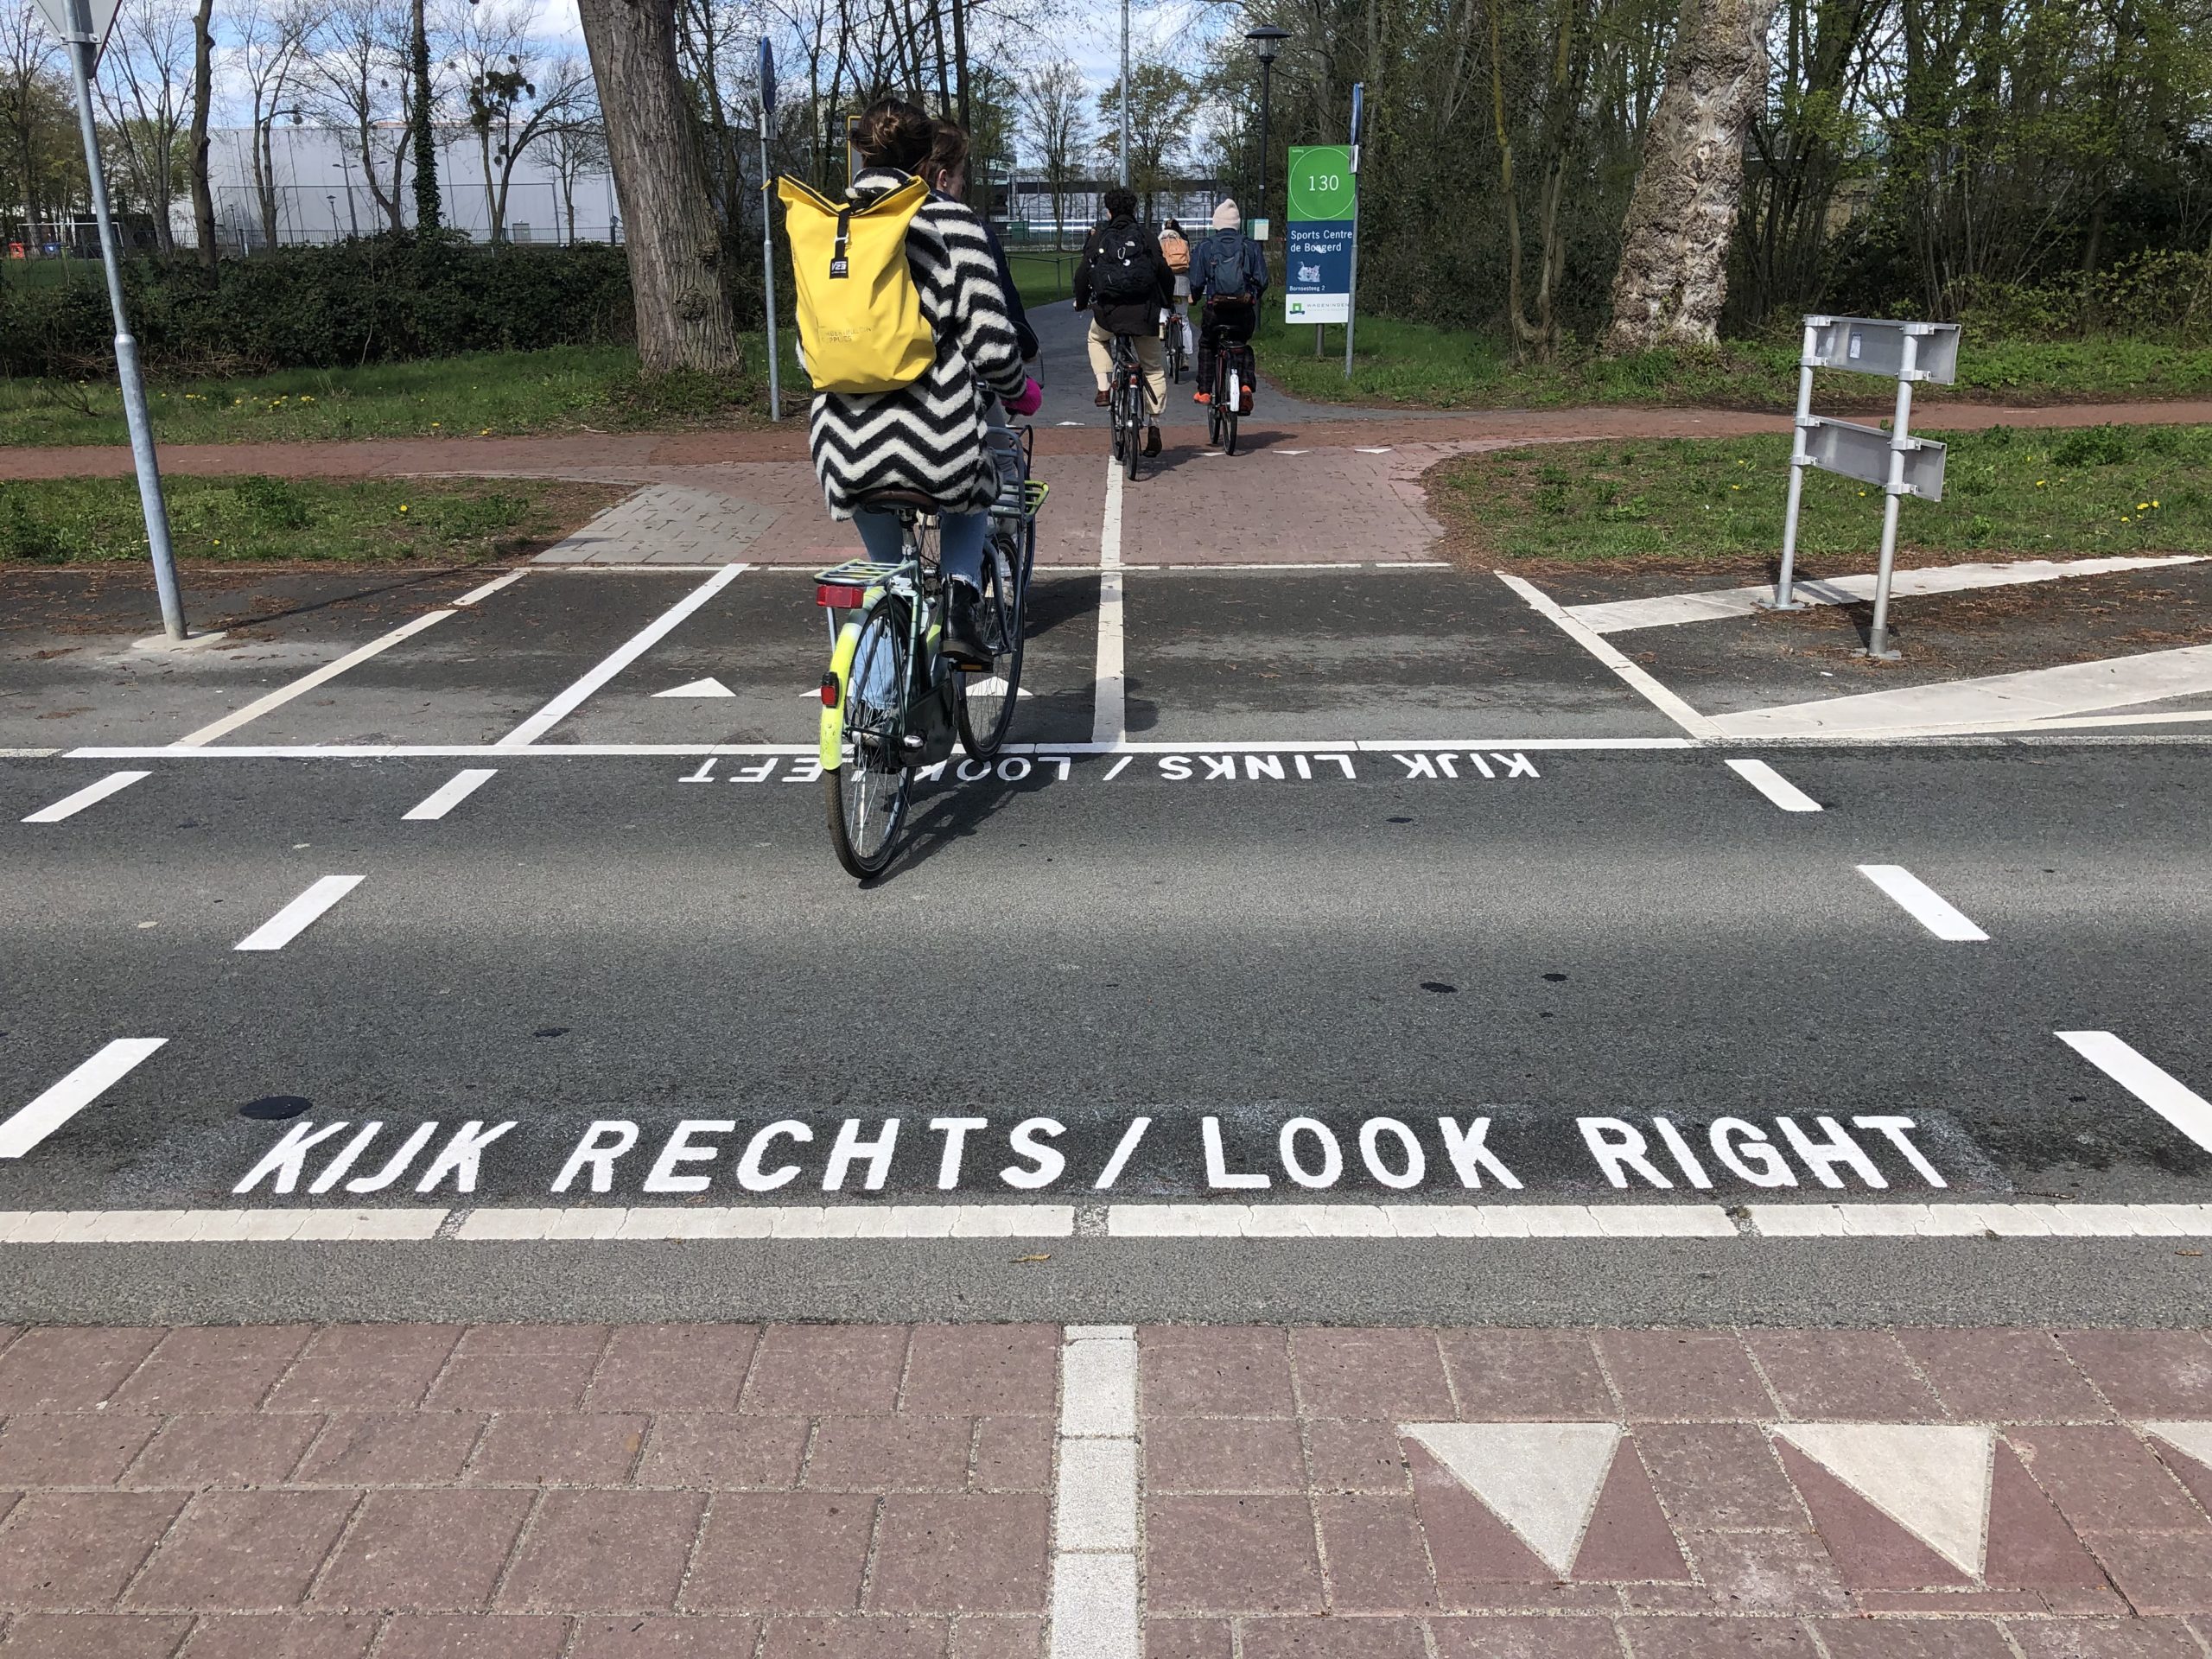 Text and triangular road markings on Nijenoord Allee crossing